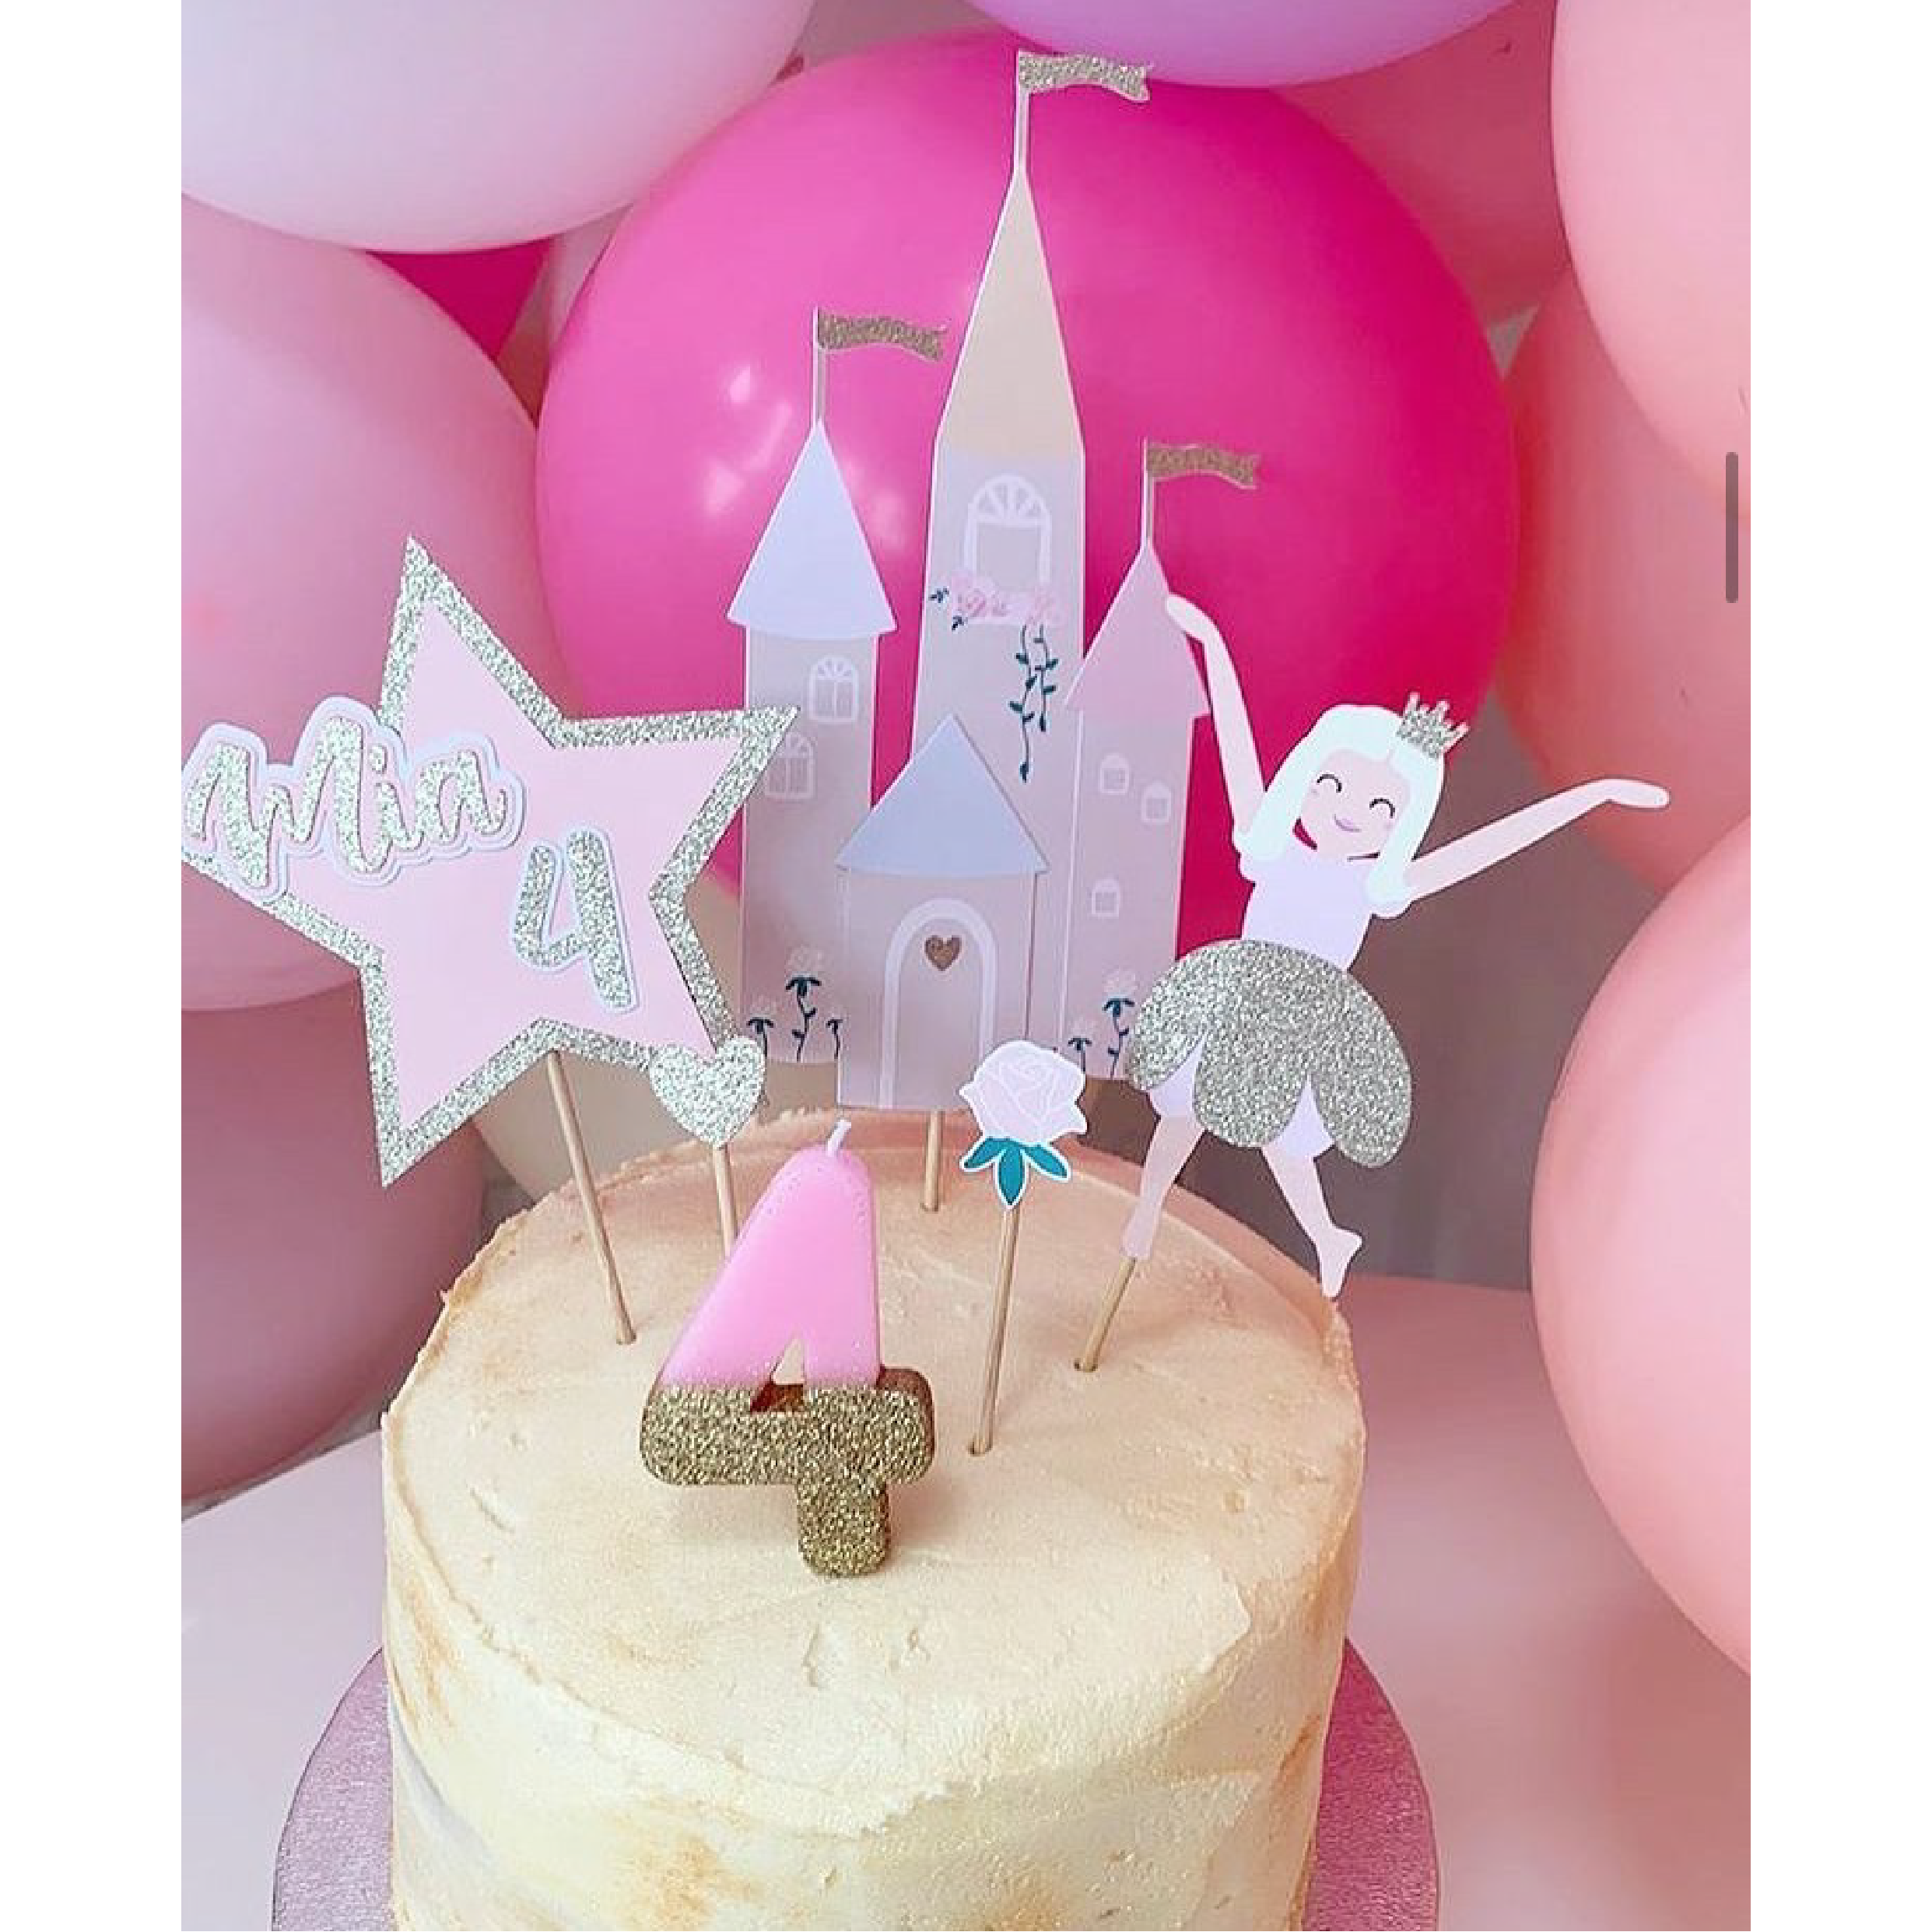 Princess birthday cake topper design template | PosterMyWall